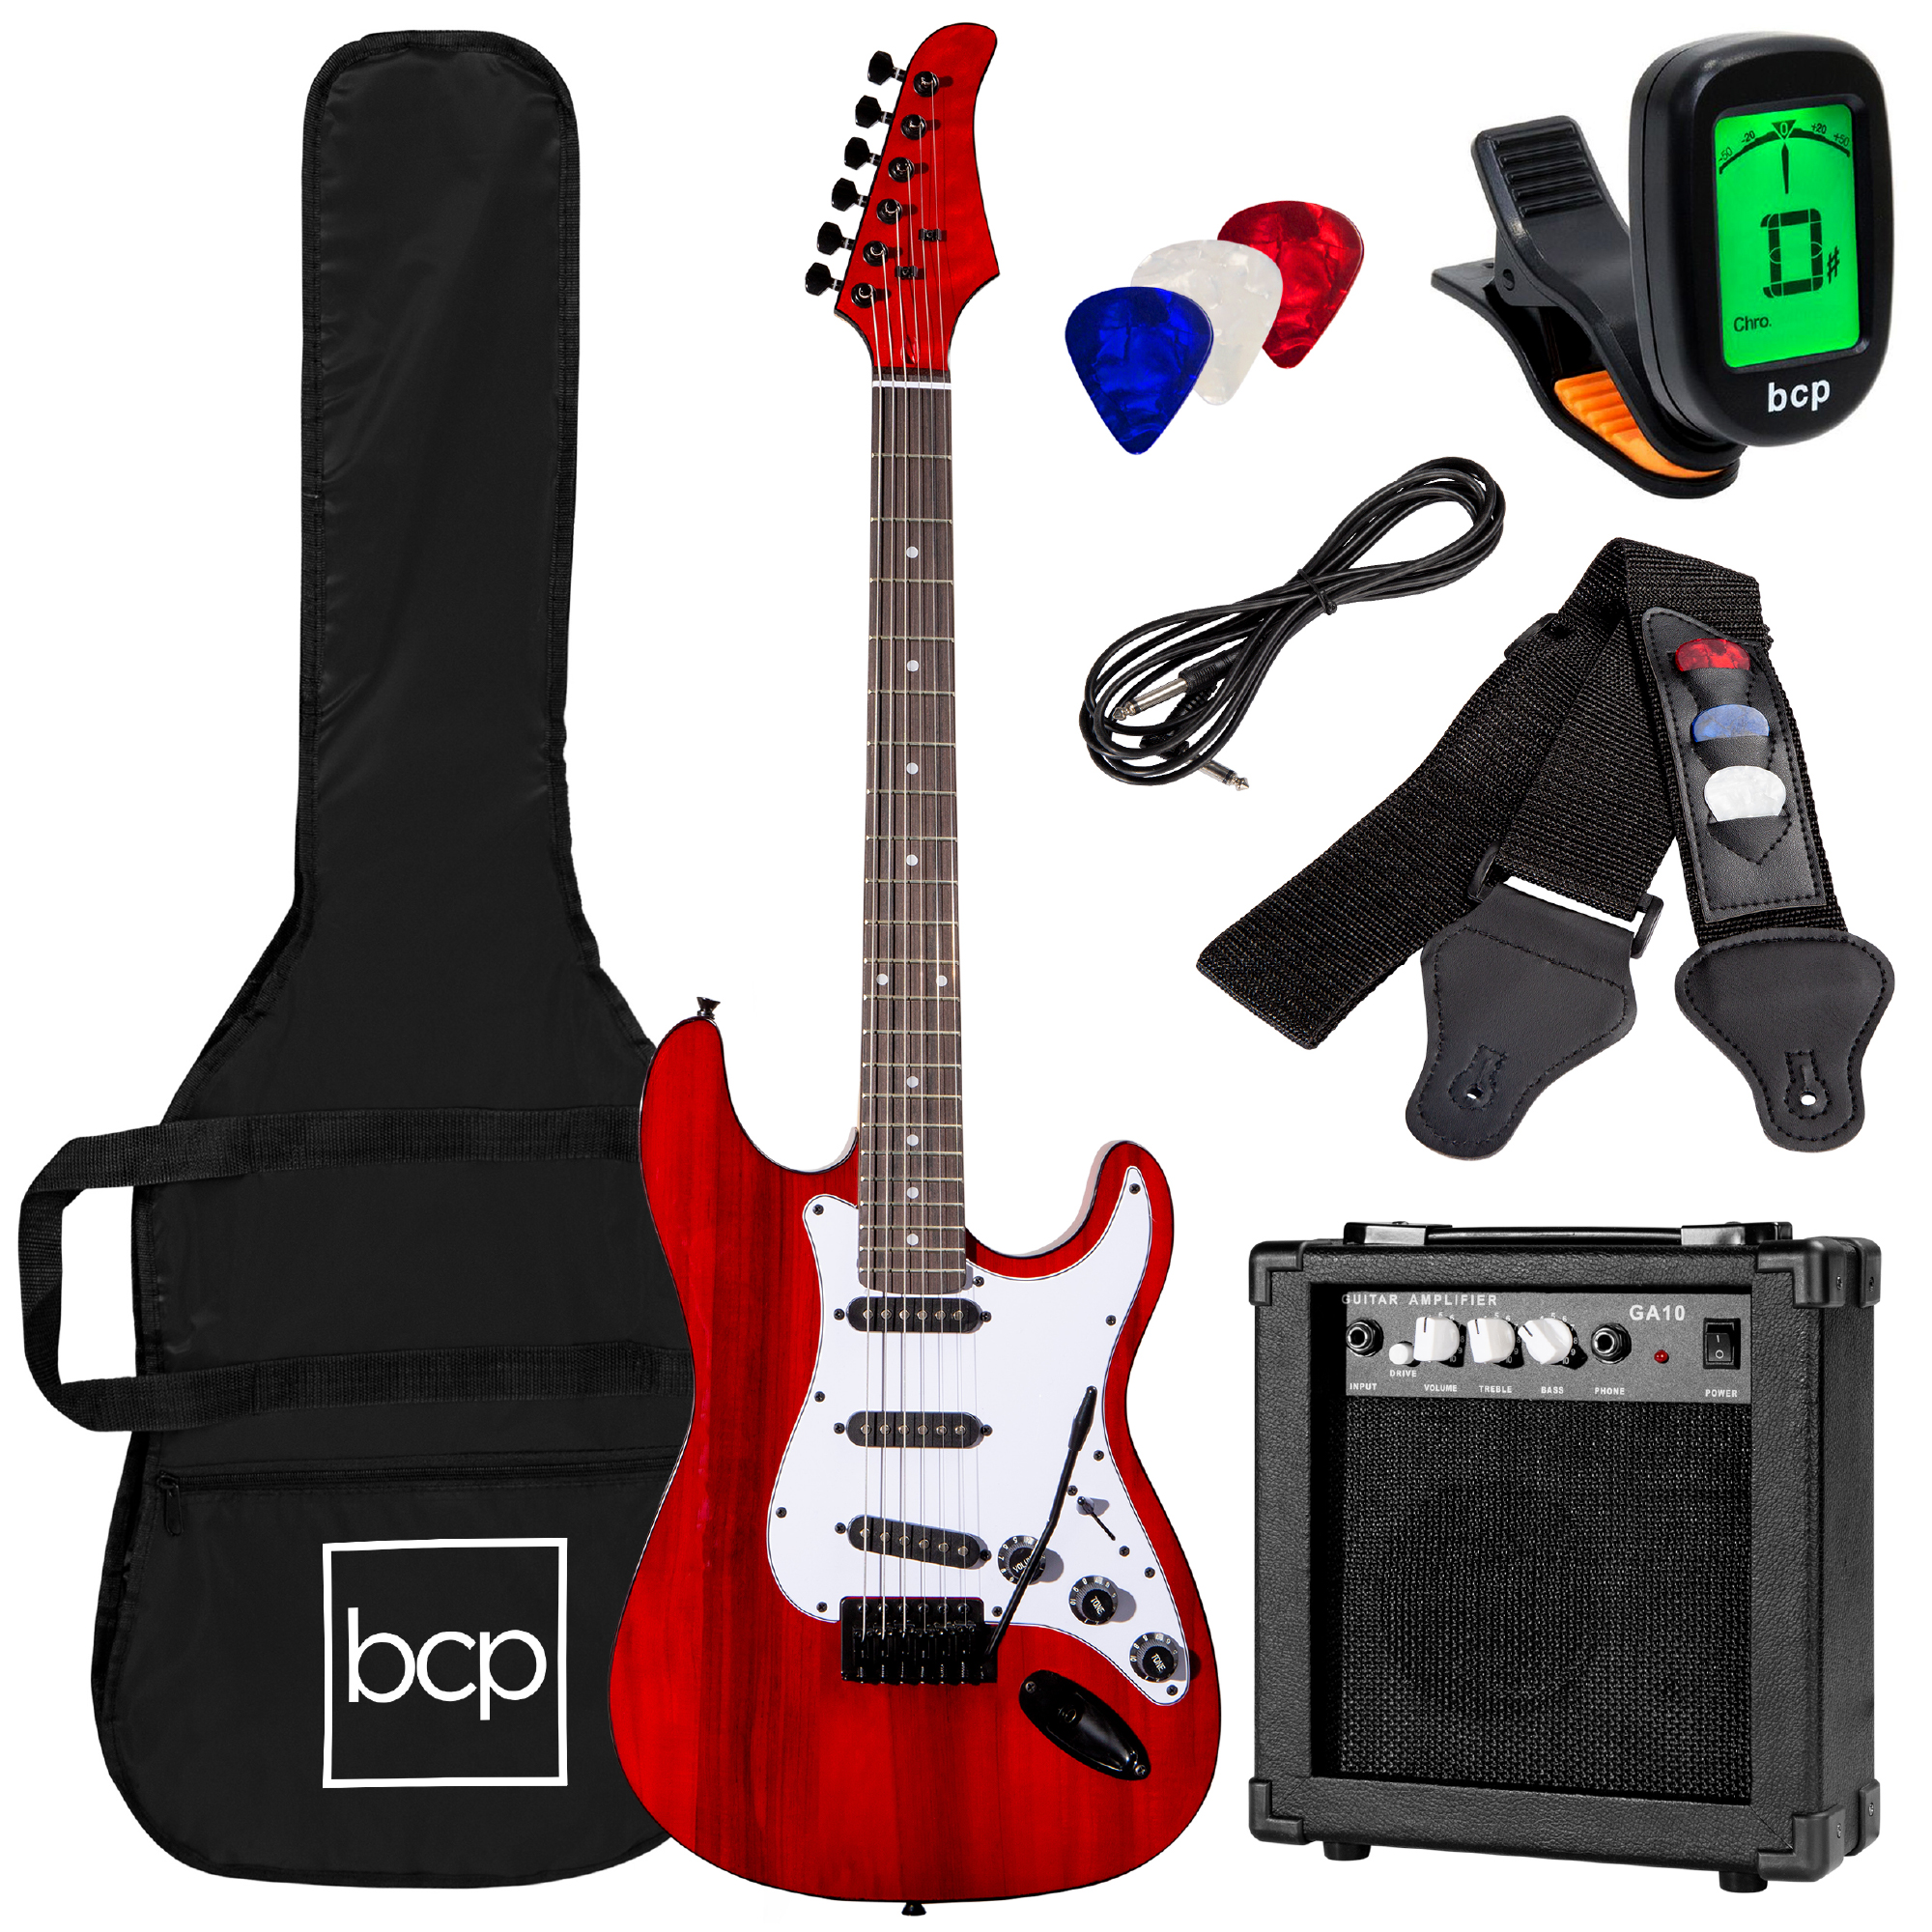 Best Choice Products 39in Full Size Beginner Electric Guitar Kit with Case, Strap, Amp, Whammy Bar - Cherry Red - image 1 of 6